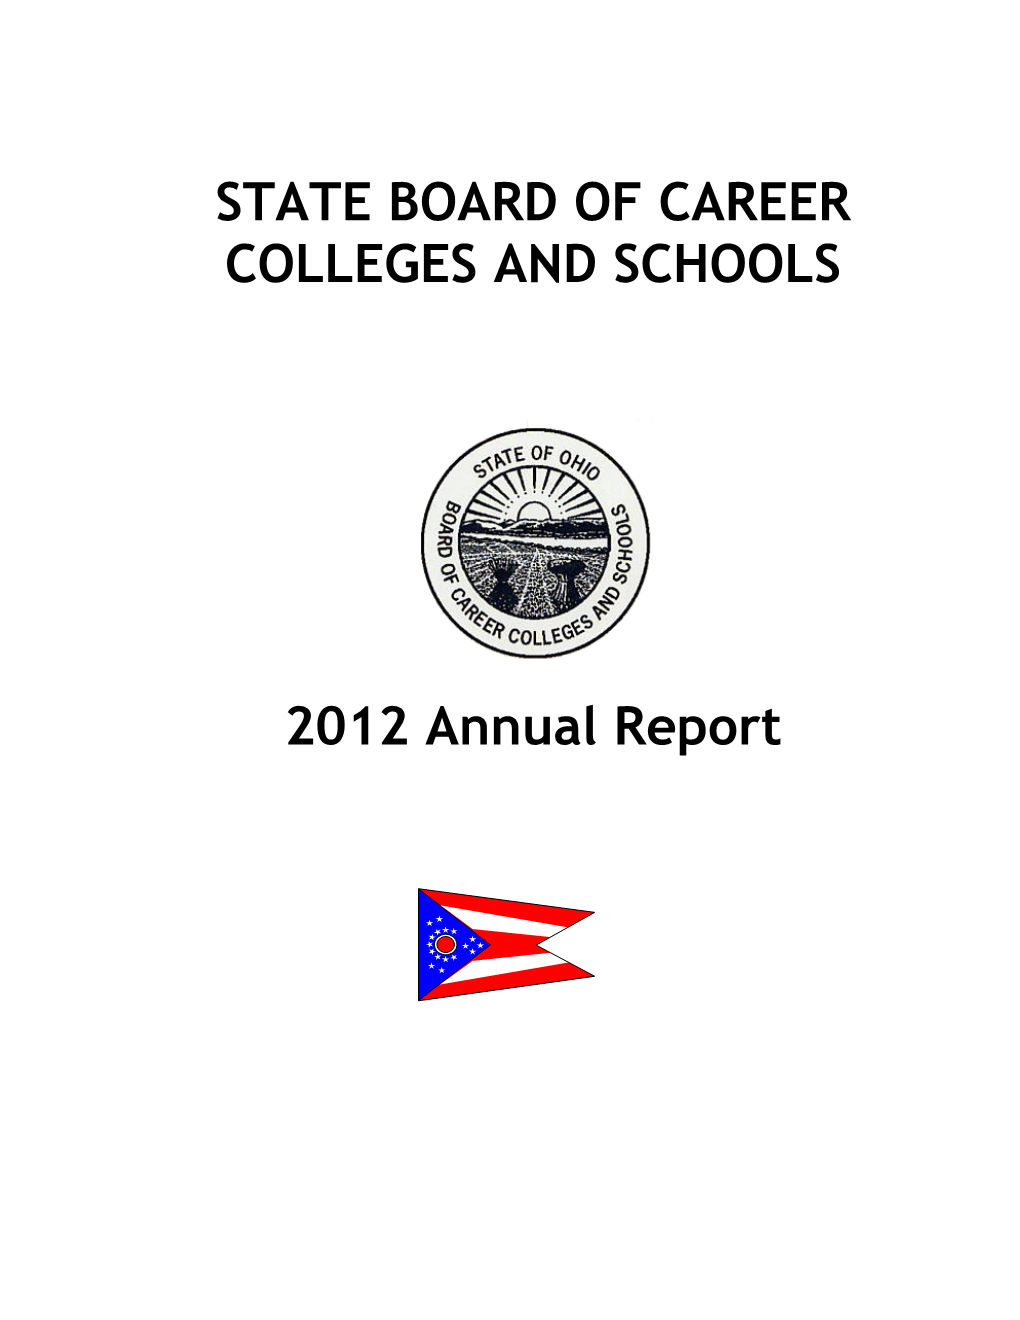 Annual Report FY 2012